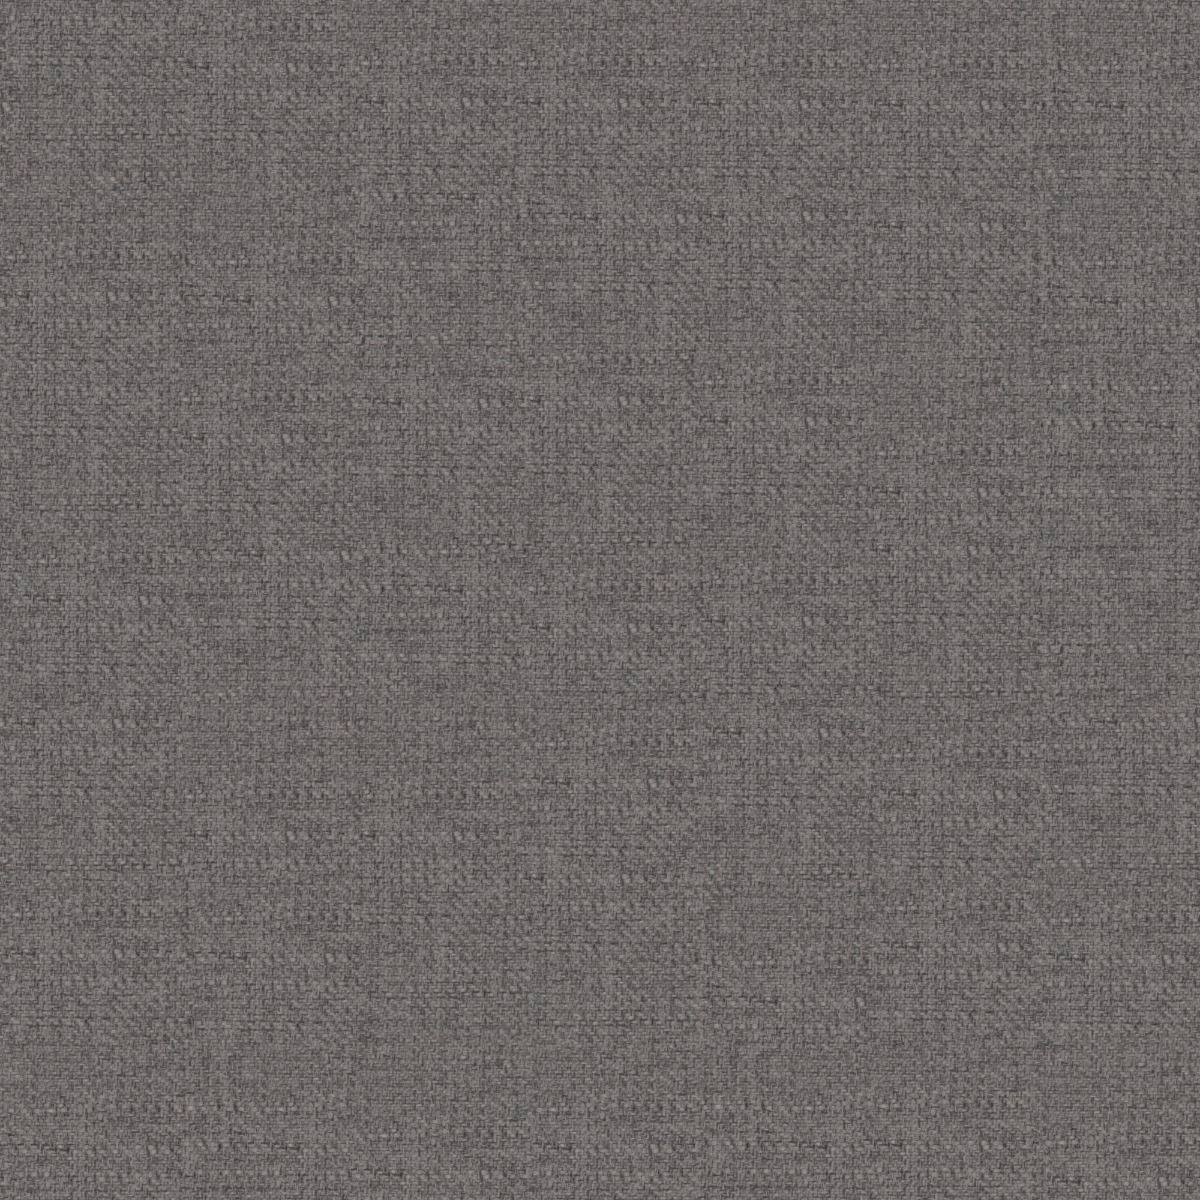 A seamless fabric texture with plain brown texture units arranged in a None pattern